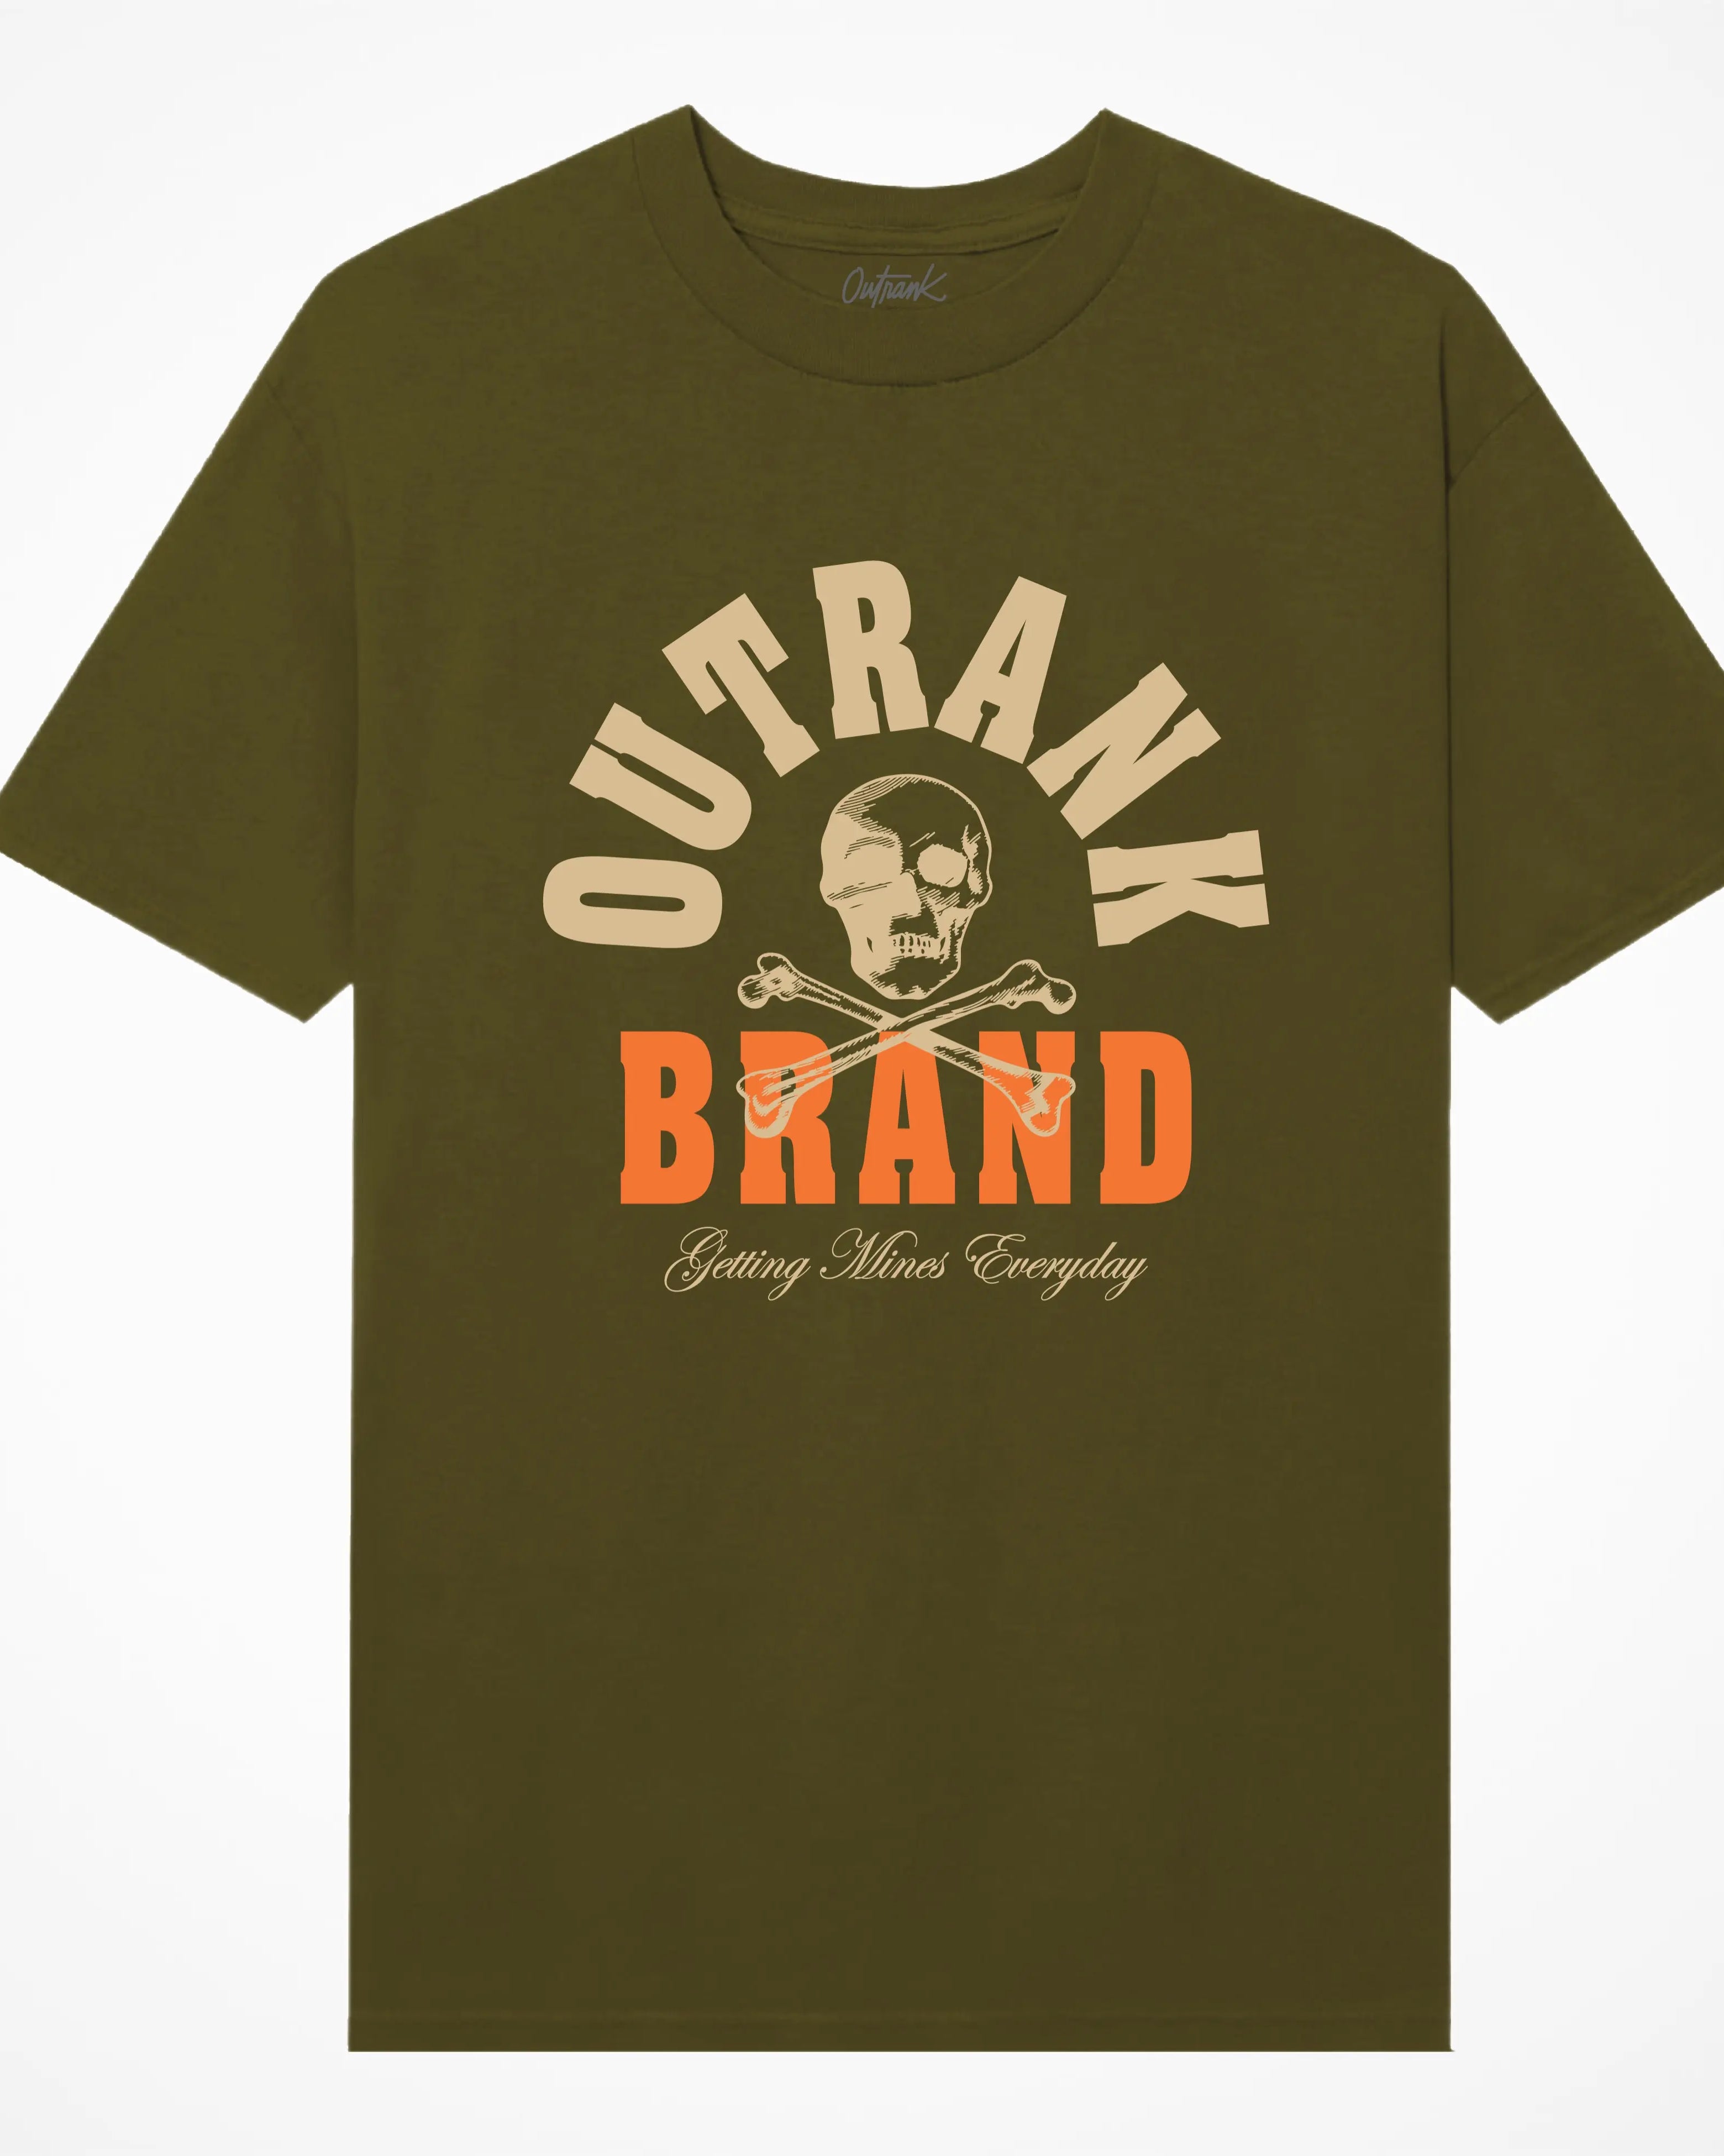 Getting Mines Everyday Military T-Shirt - Outrank